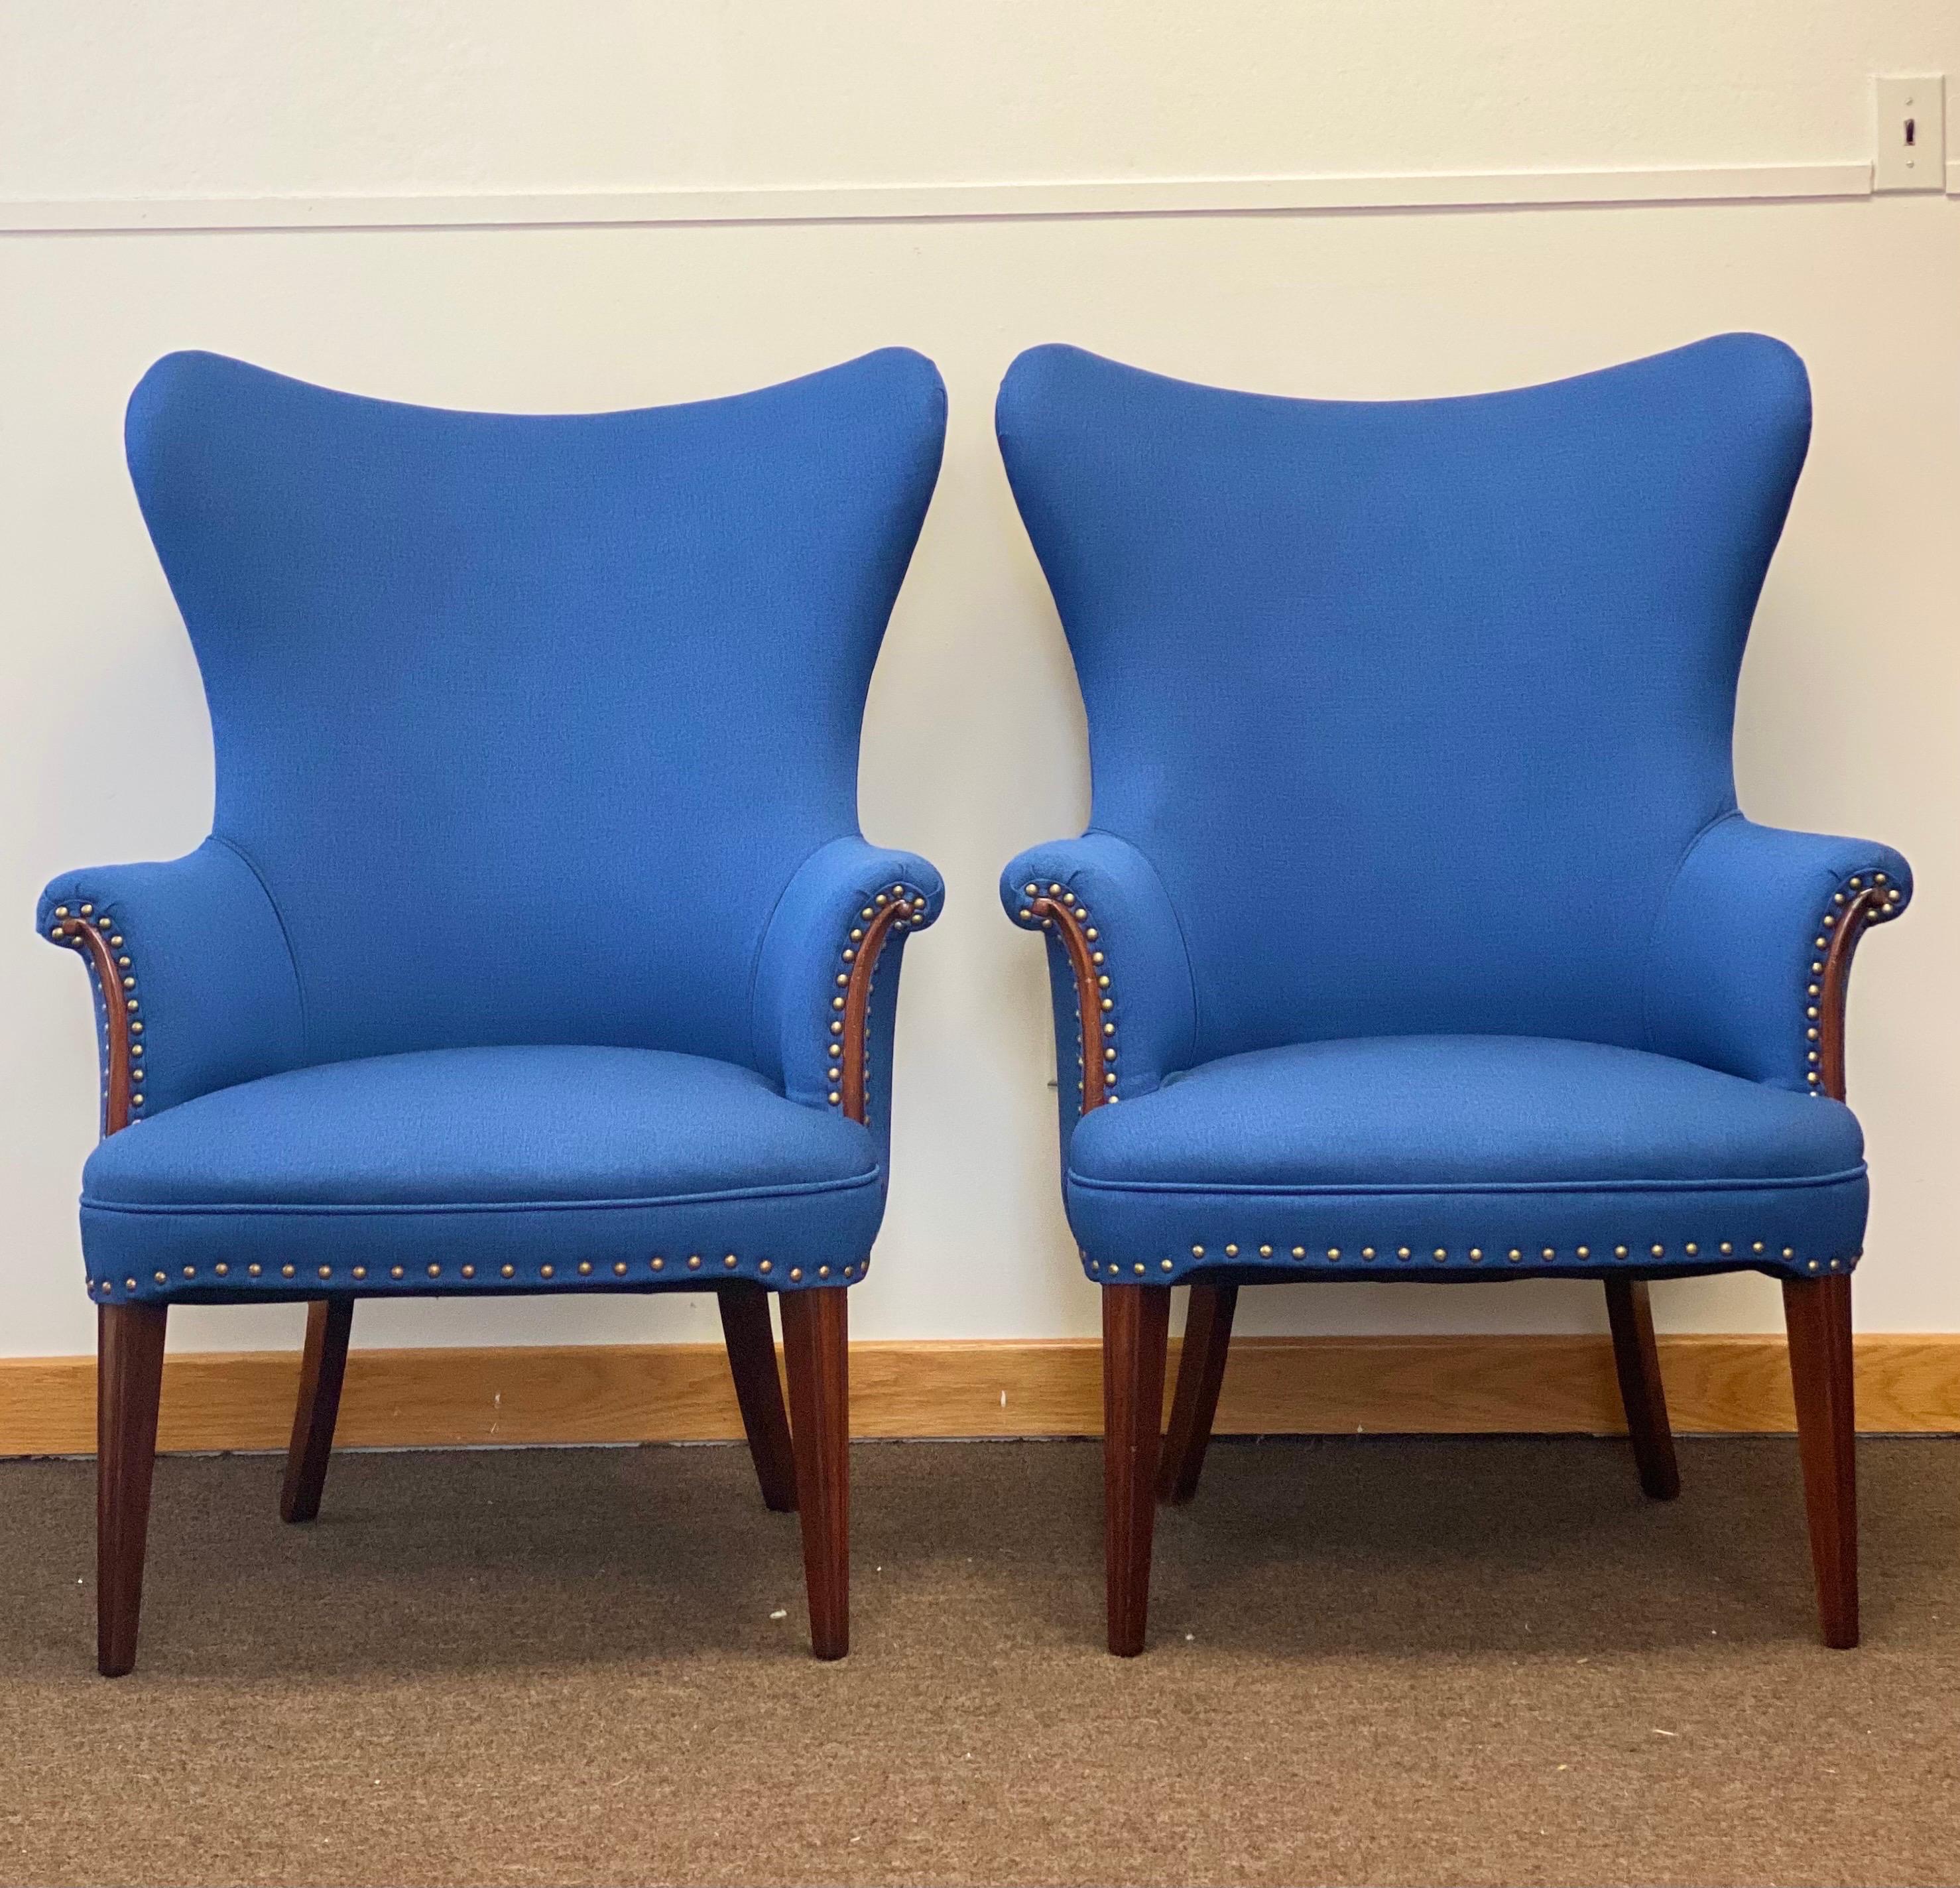 We are very pleased to offer a gorgeous, vintage pair of butterfly wingback chairs, circa the 1950s. This Scandinavian take on the classic wingback chair brings a graceful silhouette to any space. Padded wings and a generous seat offer an elegant